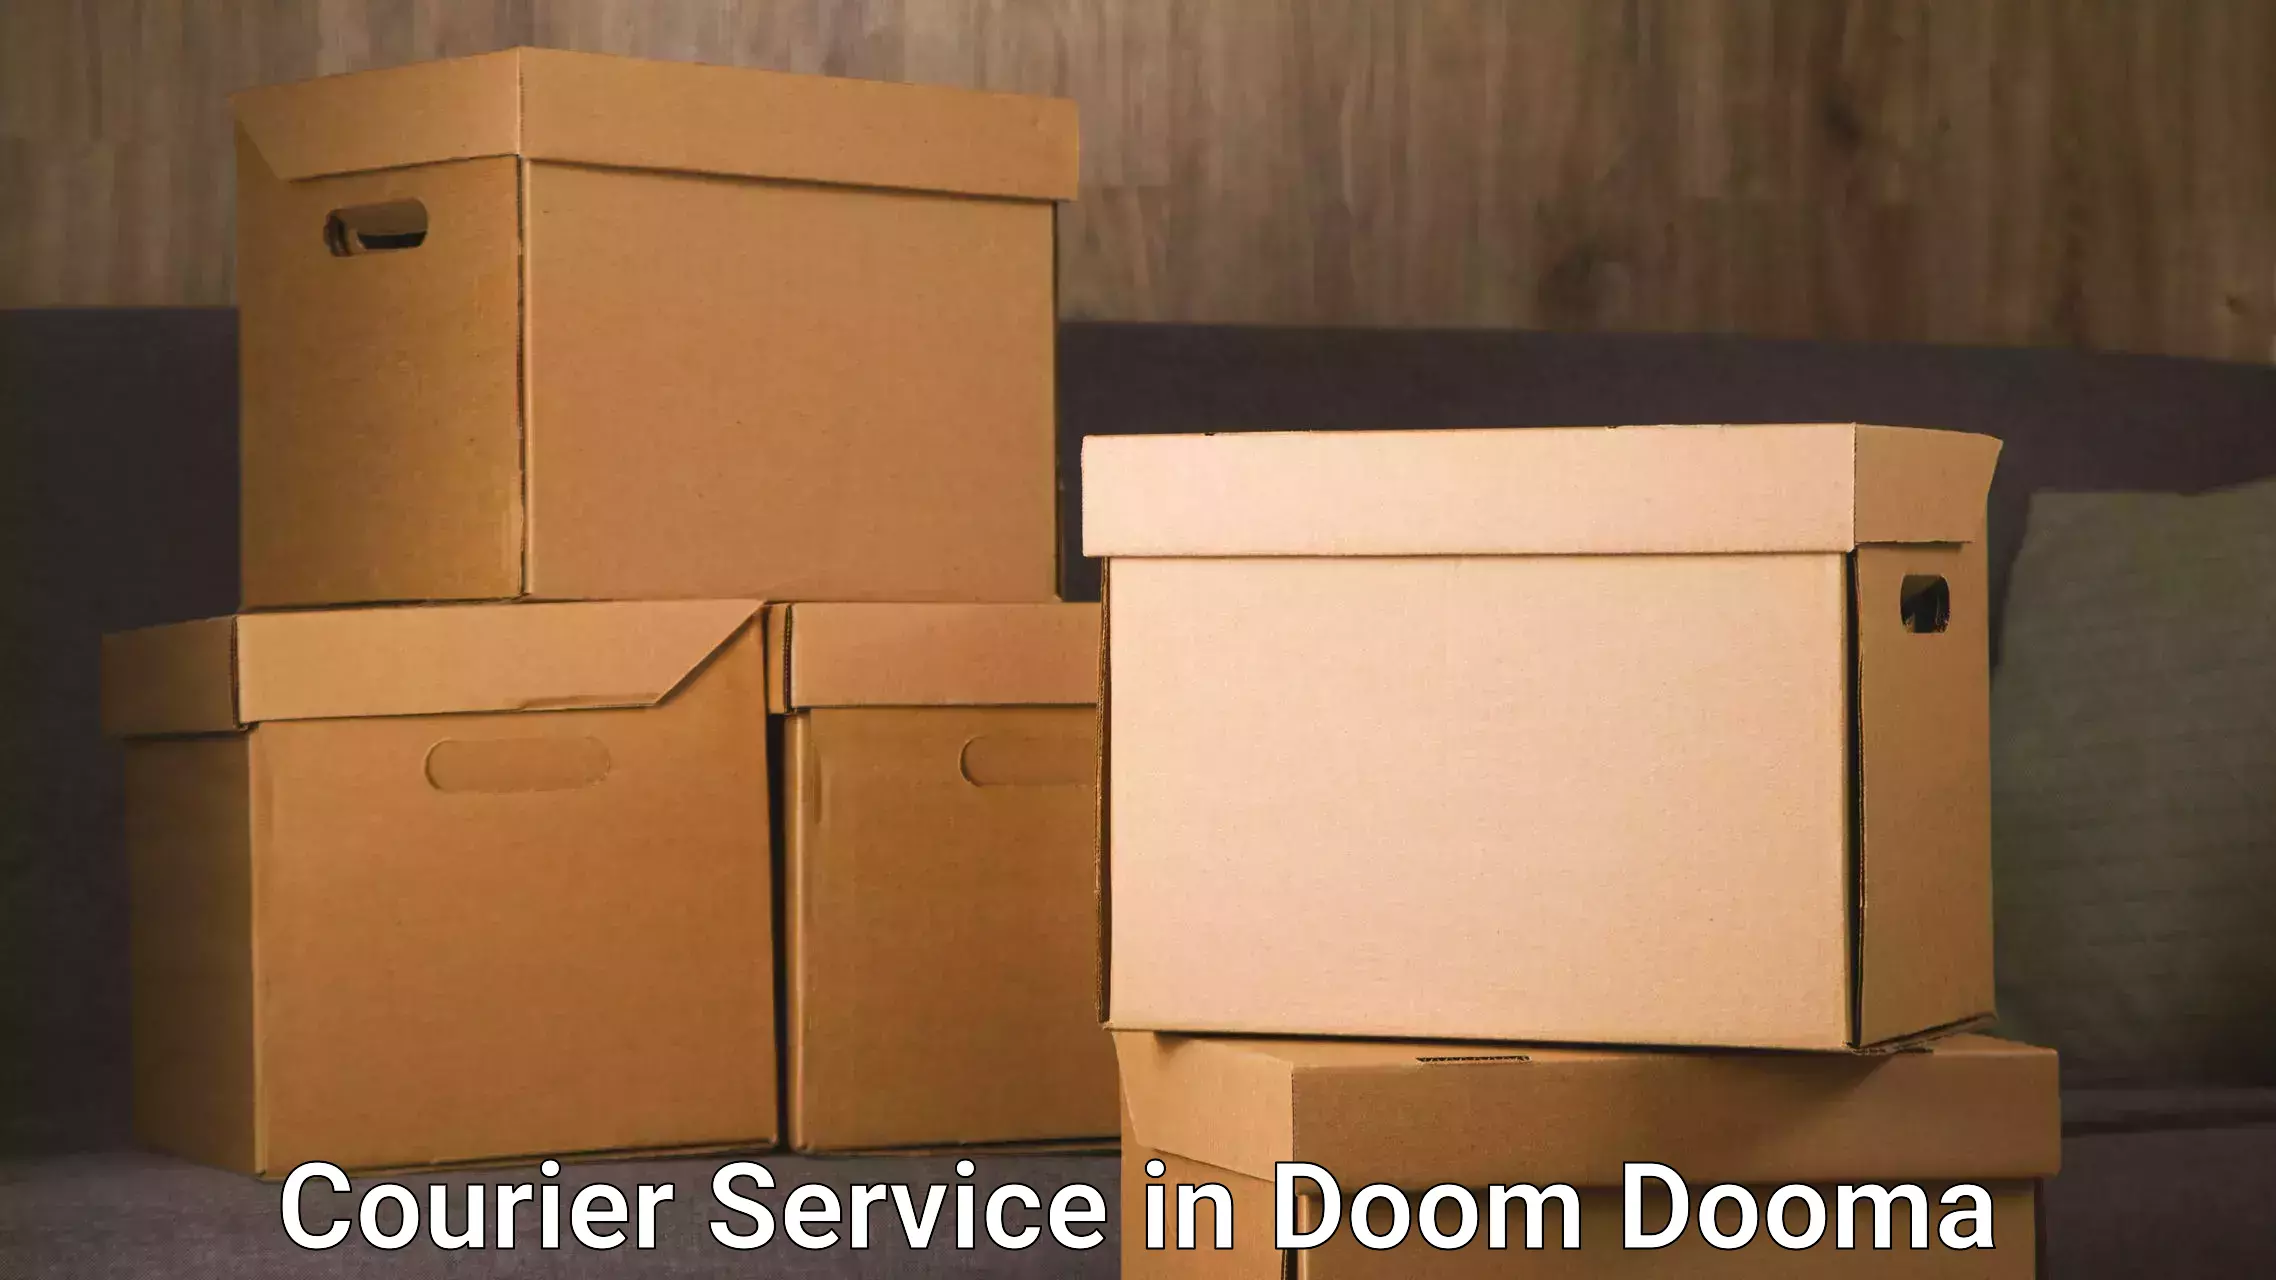 Automated shipping processes in Doom Dooma